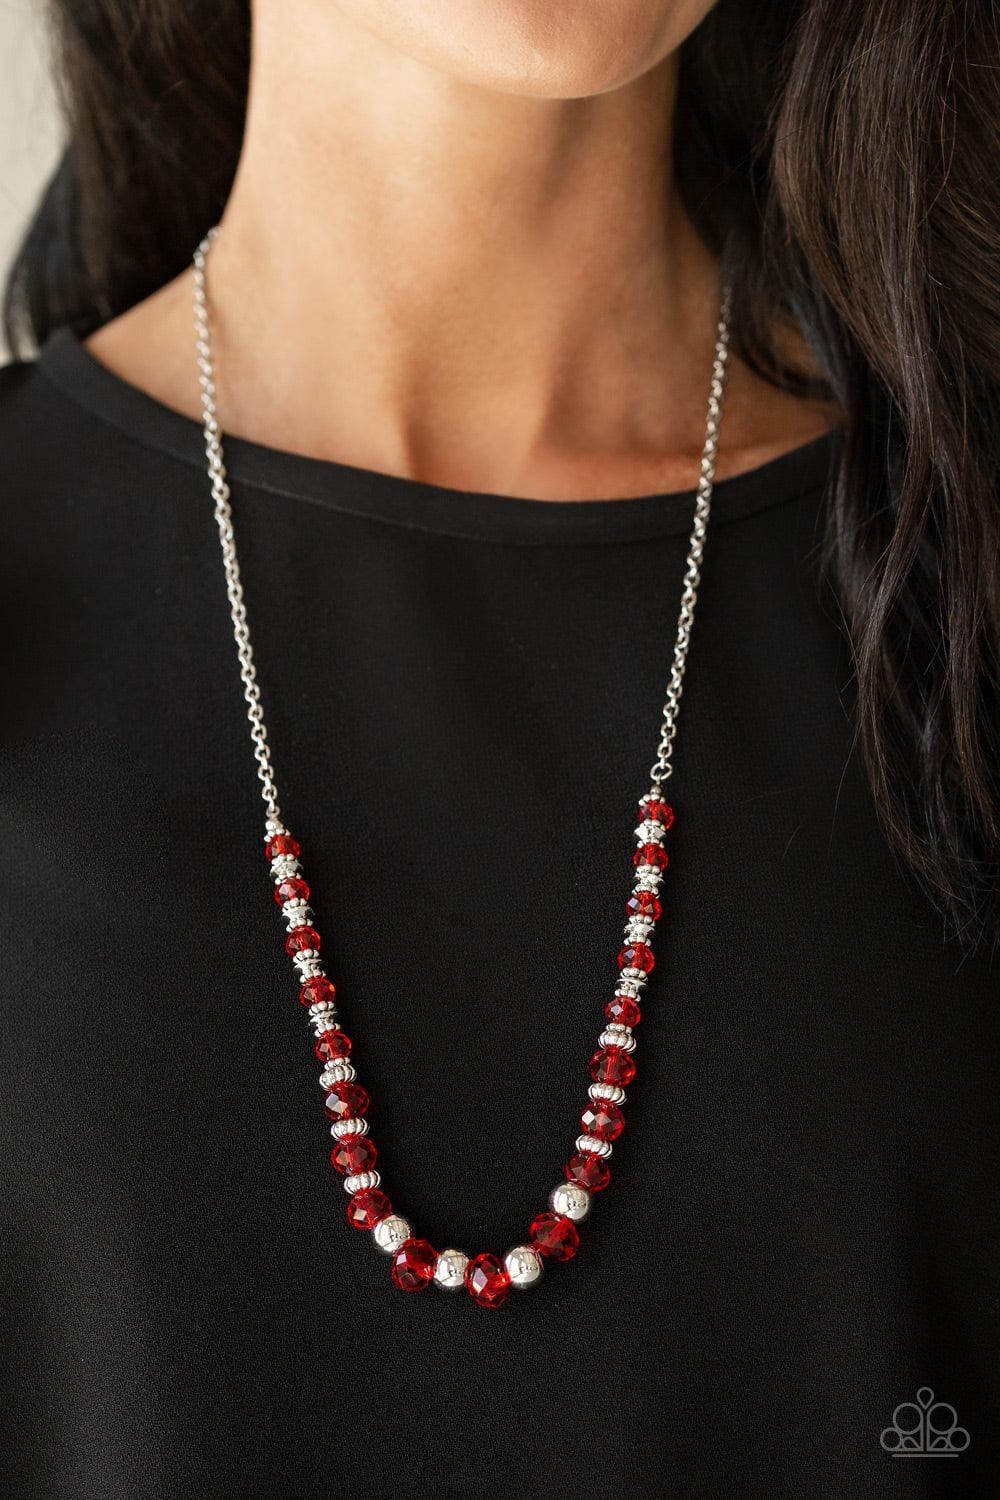 Paparazzi Accessories - Stratosphere Sparkle - Red Necklace - Bling by JessieK